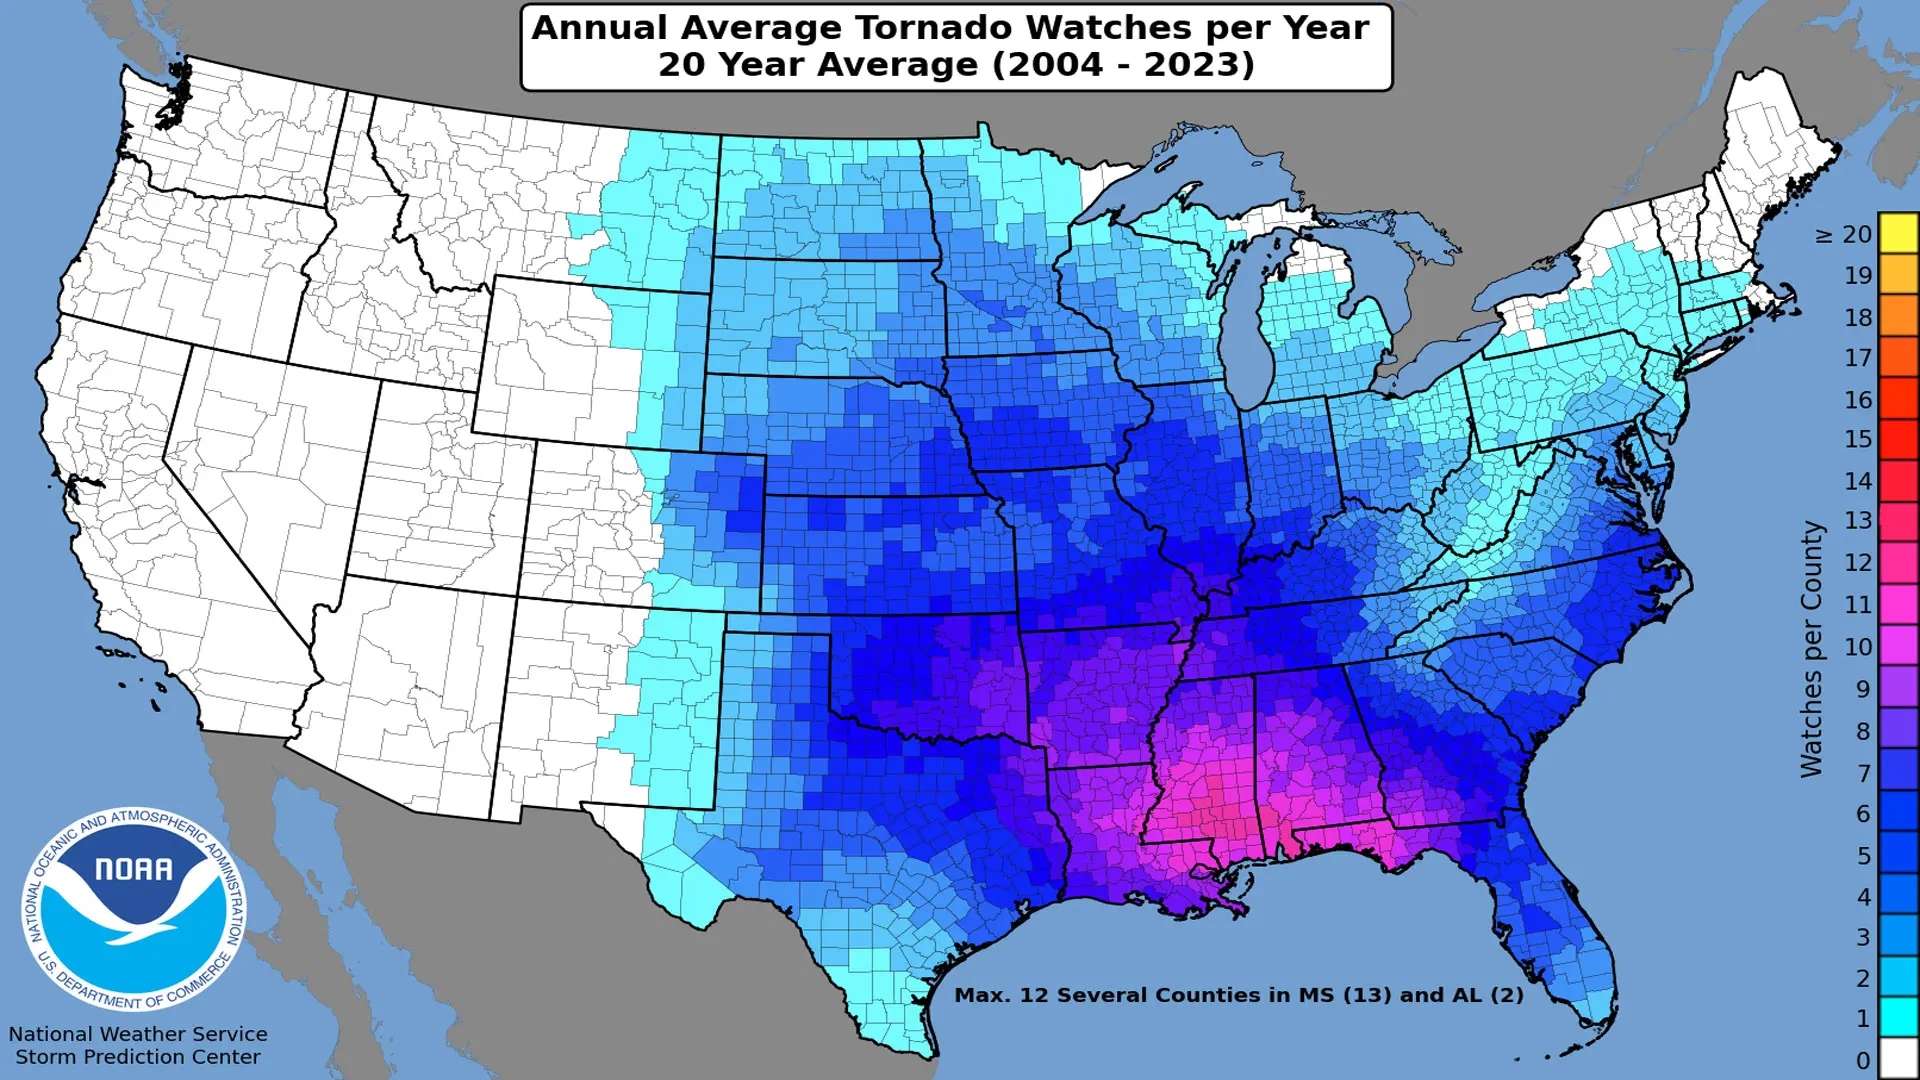 Annual average of tornado watches based on region.